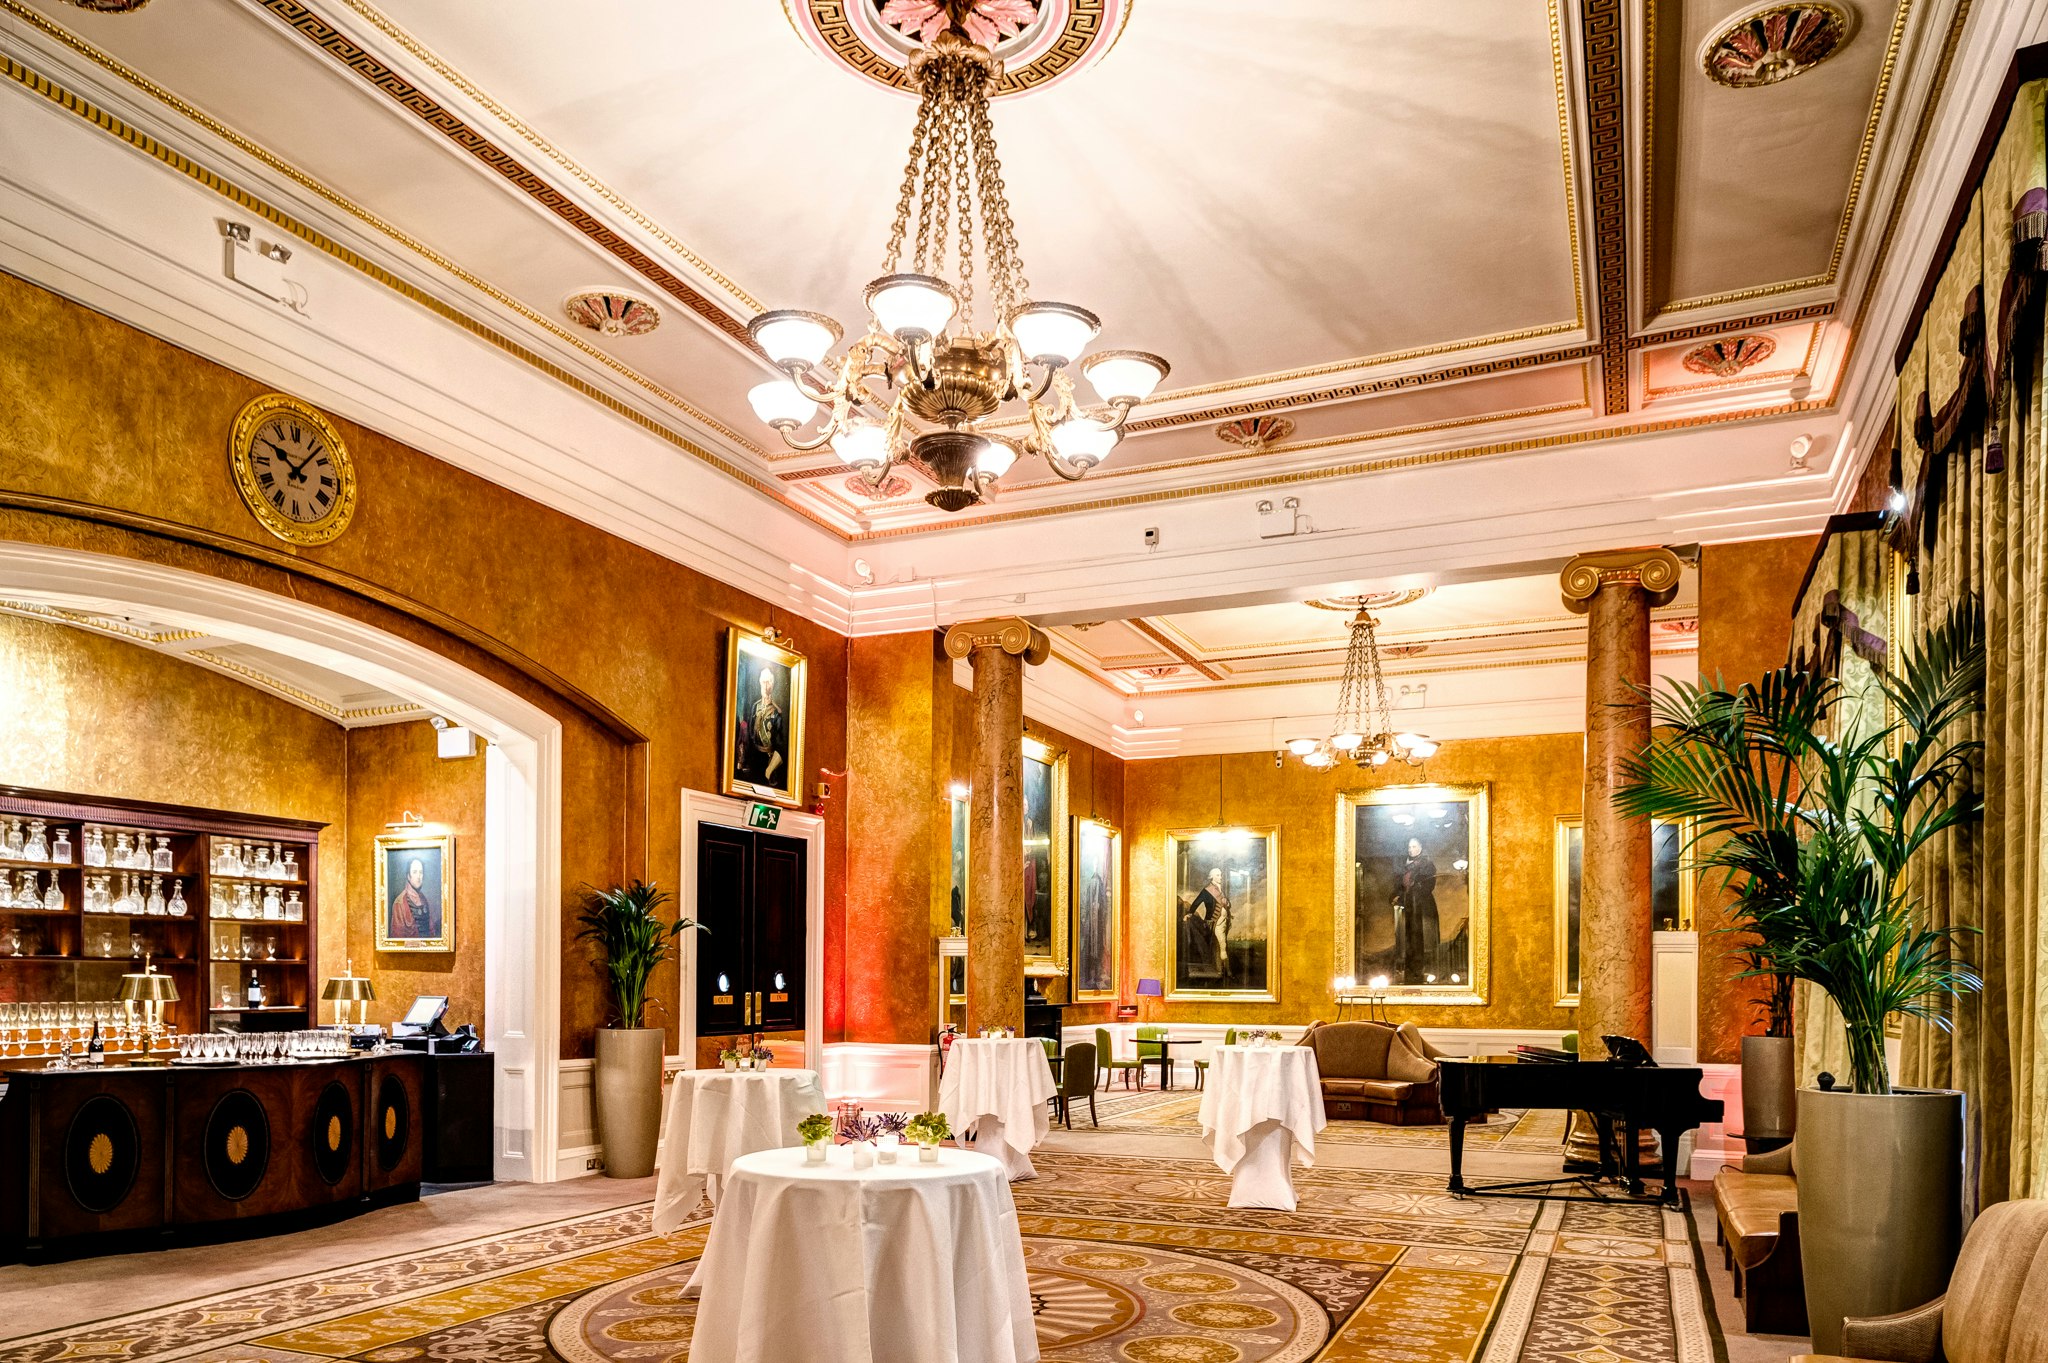 Engagement Party Venues in London - 116 Pall Mall - Weddings in Carlton Room - Banner